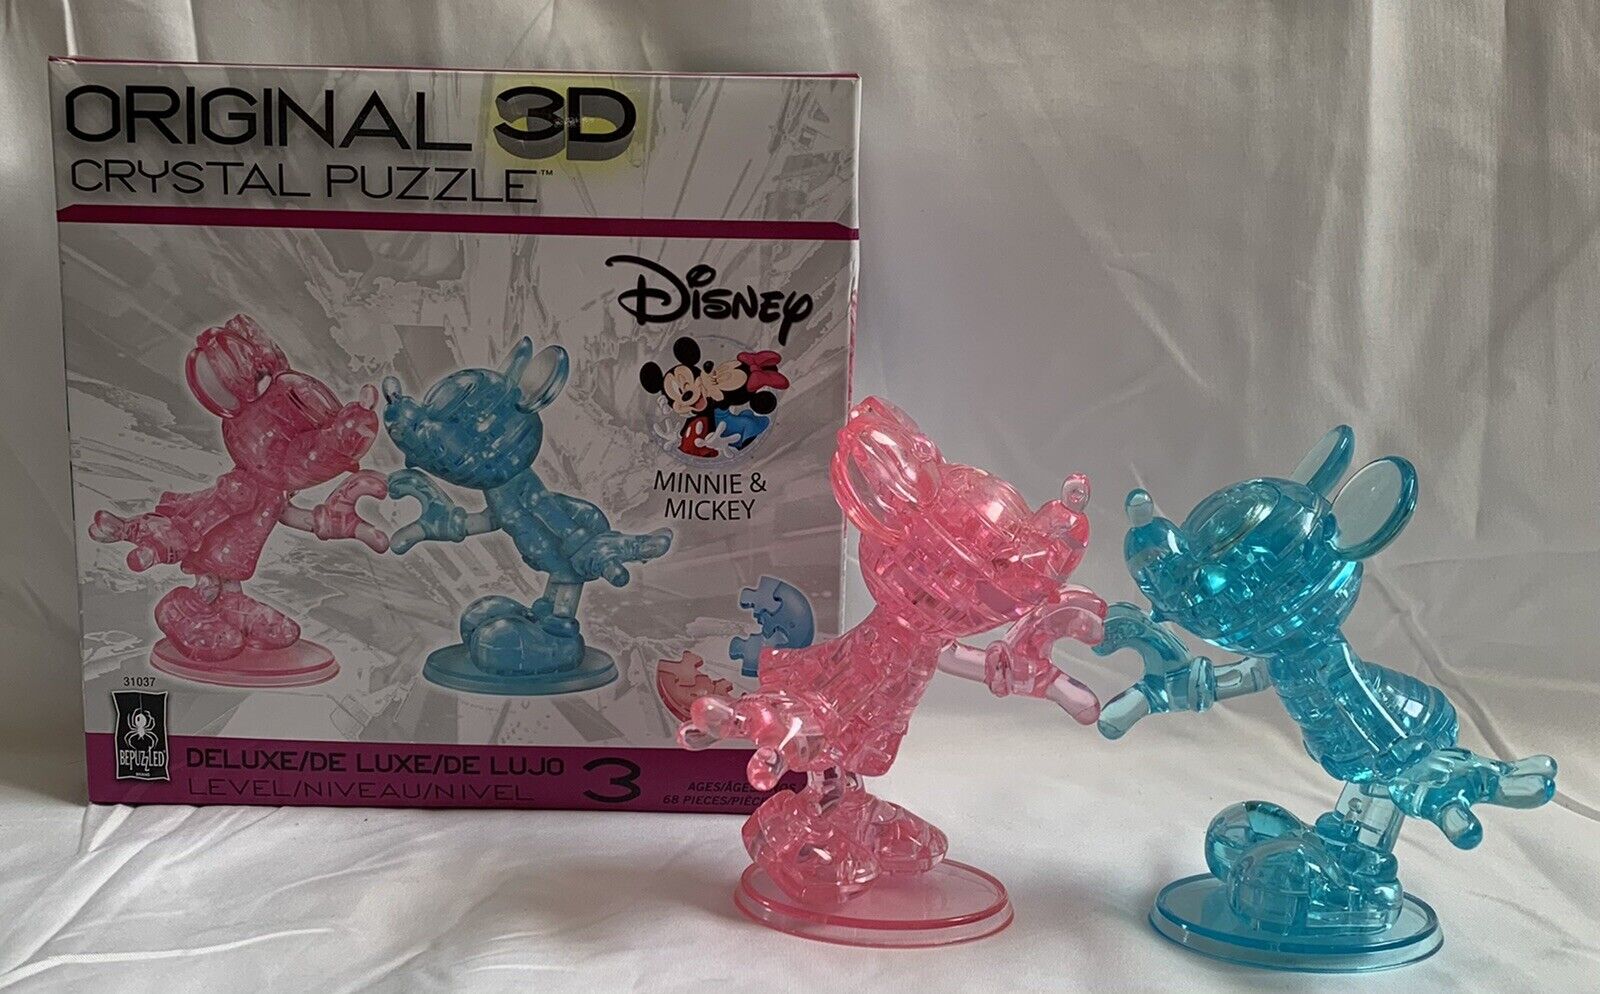 BePuzzled Original 3D Crystal Jigsaw Puzzle Disney Mickey & Minnie Mouse Level 3